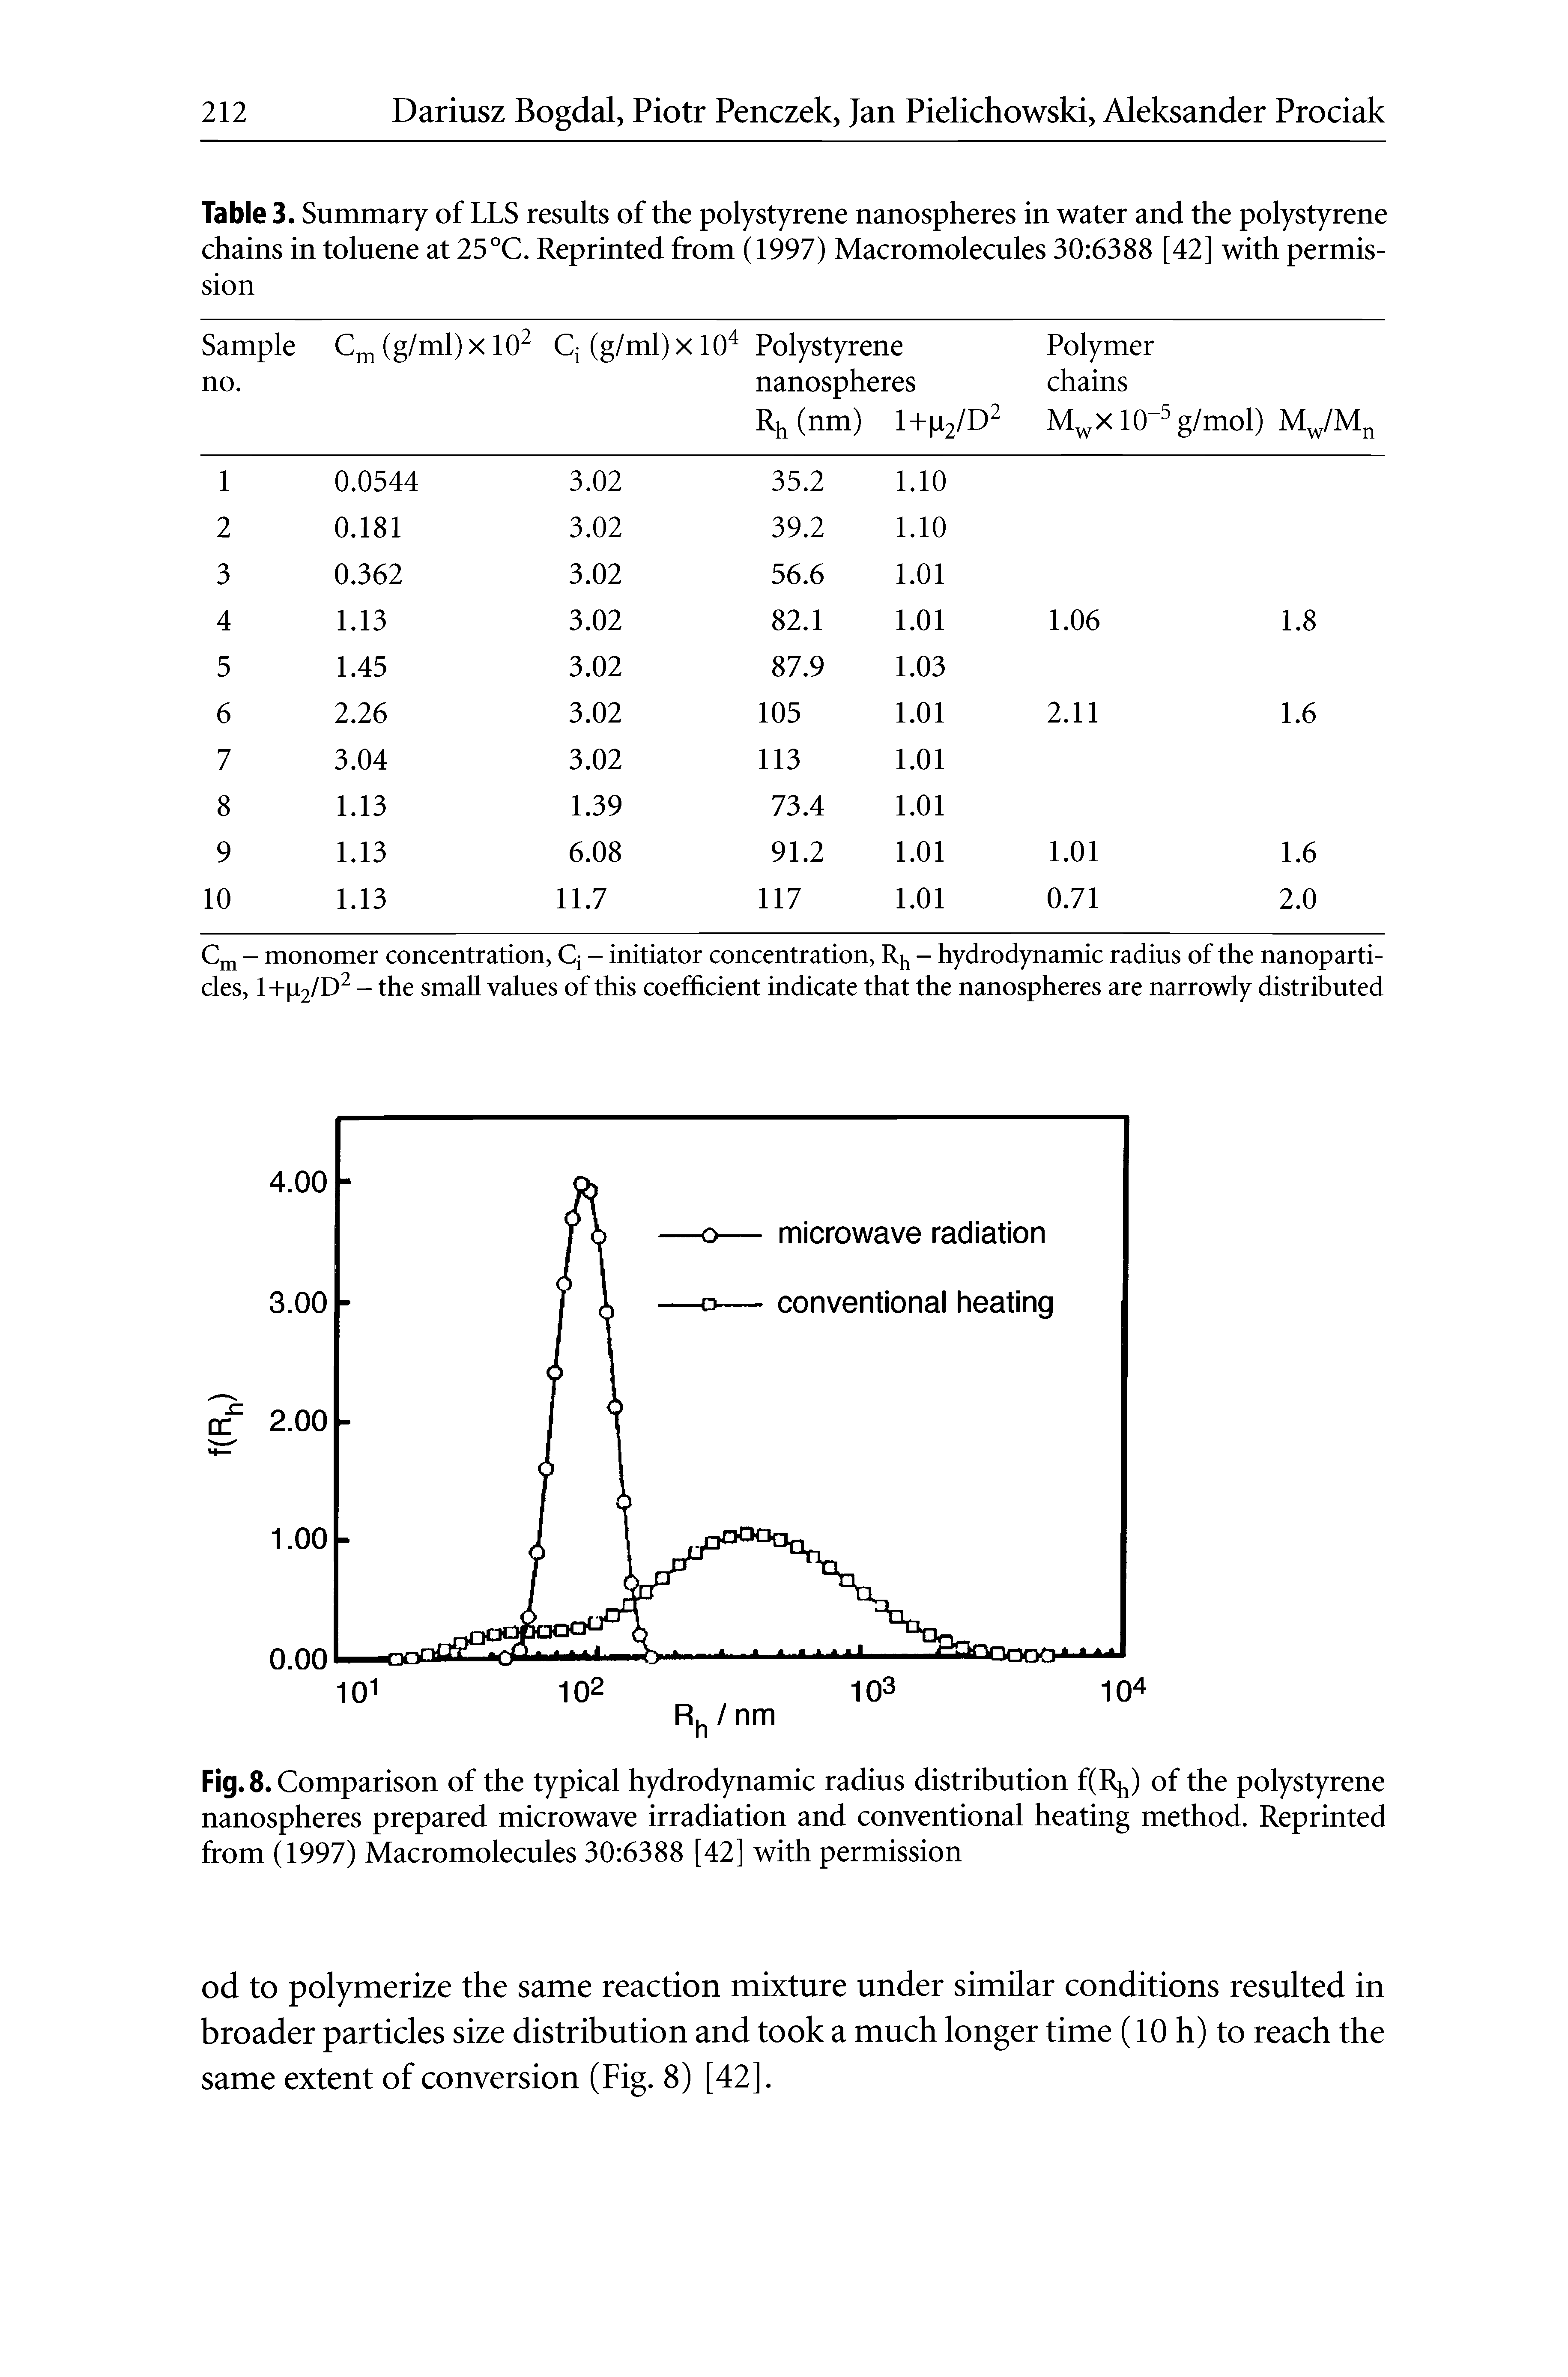 Table 3. Summary of LLS results of the polystyrene nanospheres in water and the polystyrene chains in toluene at 25°C. Reprinted from (1997) Macromolecules 30 6388 [42] with permission...